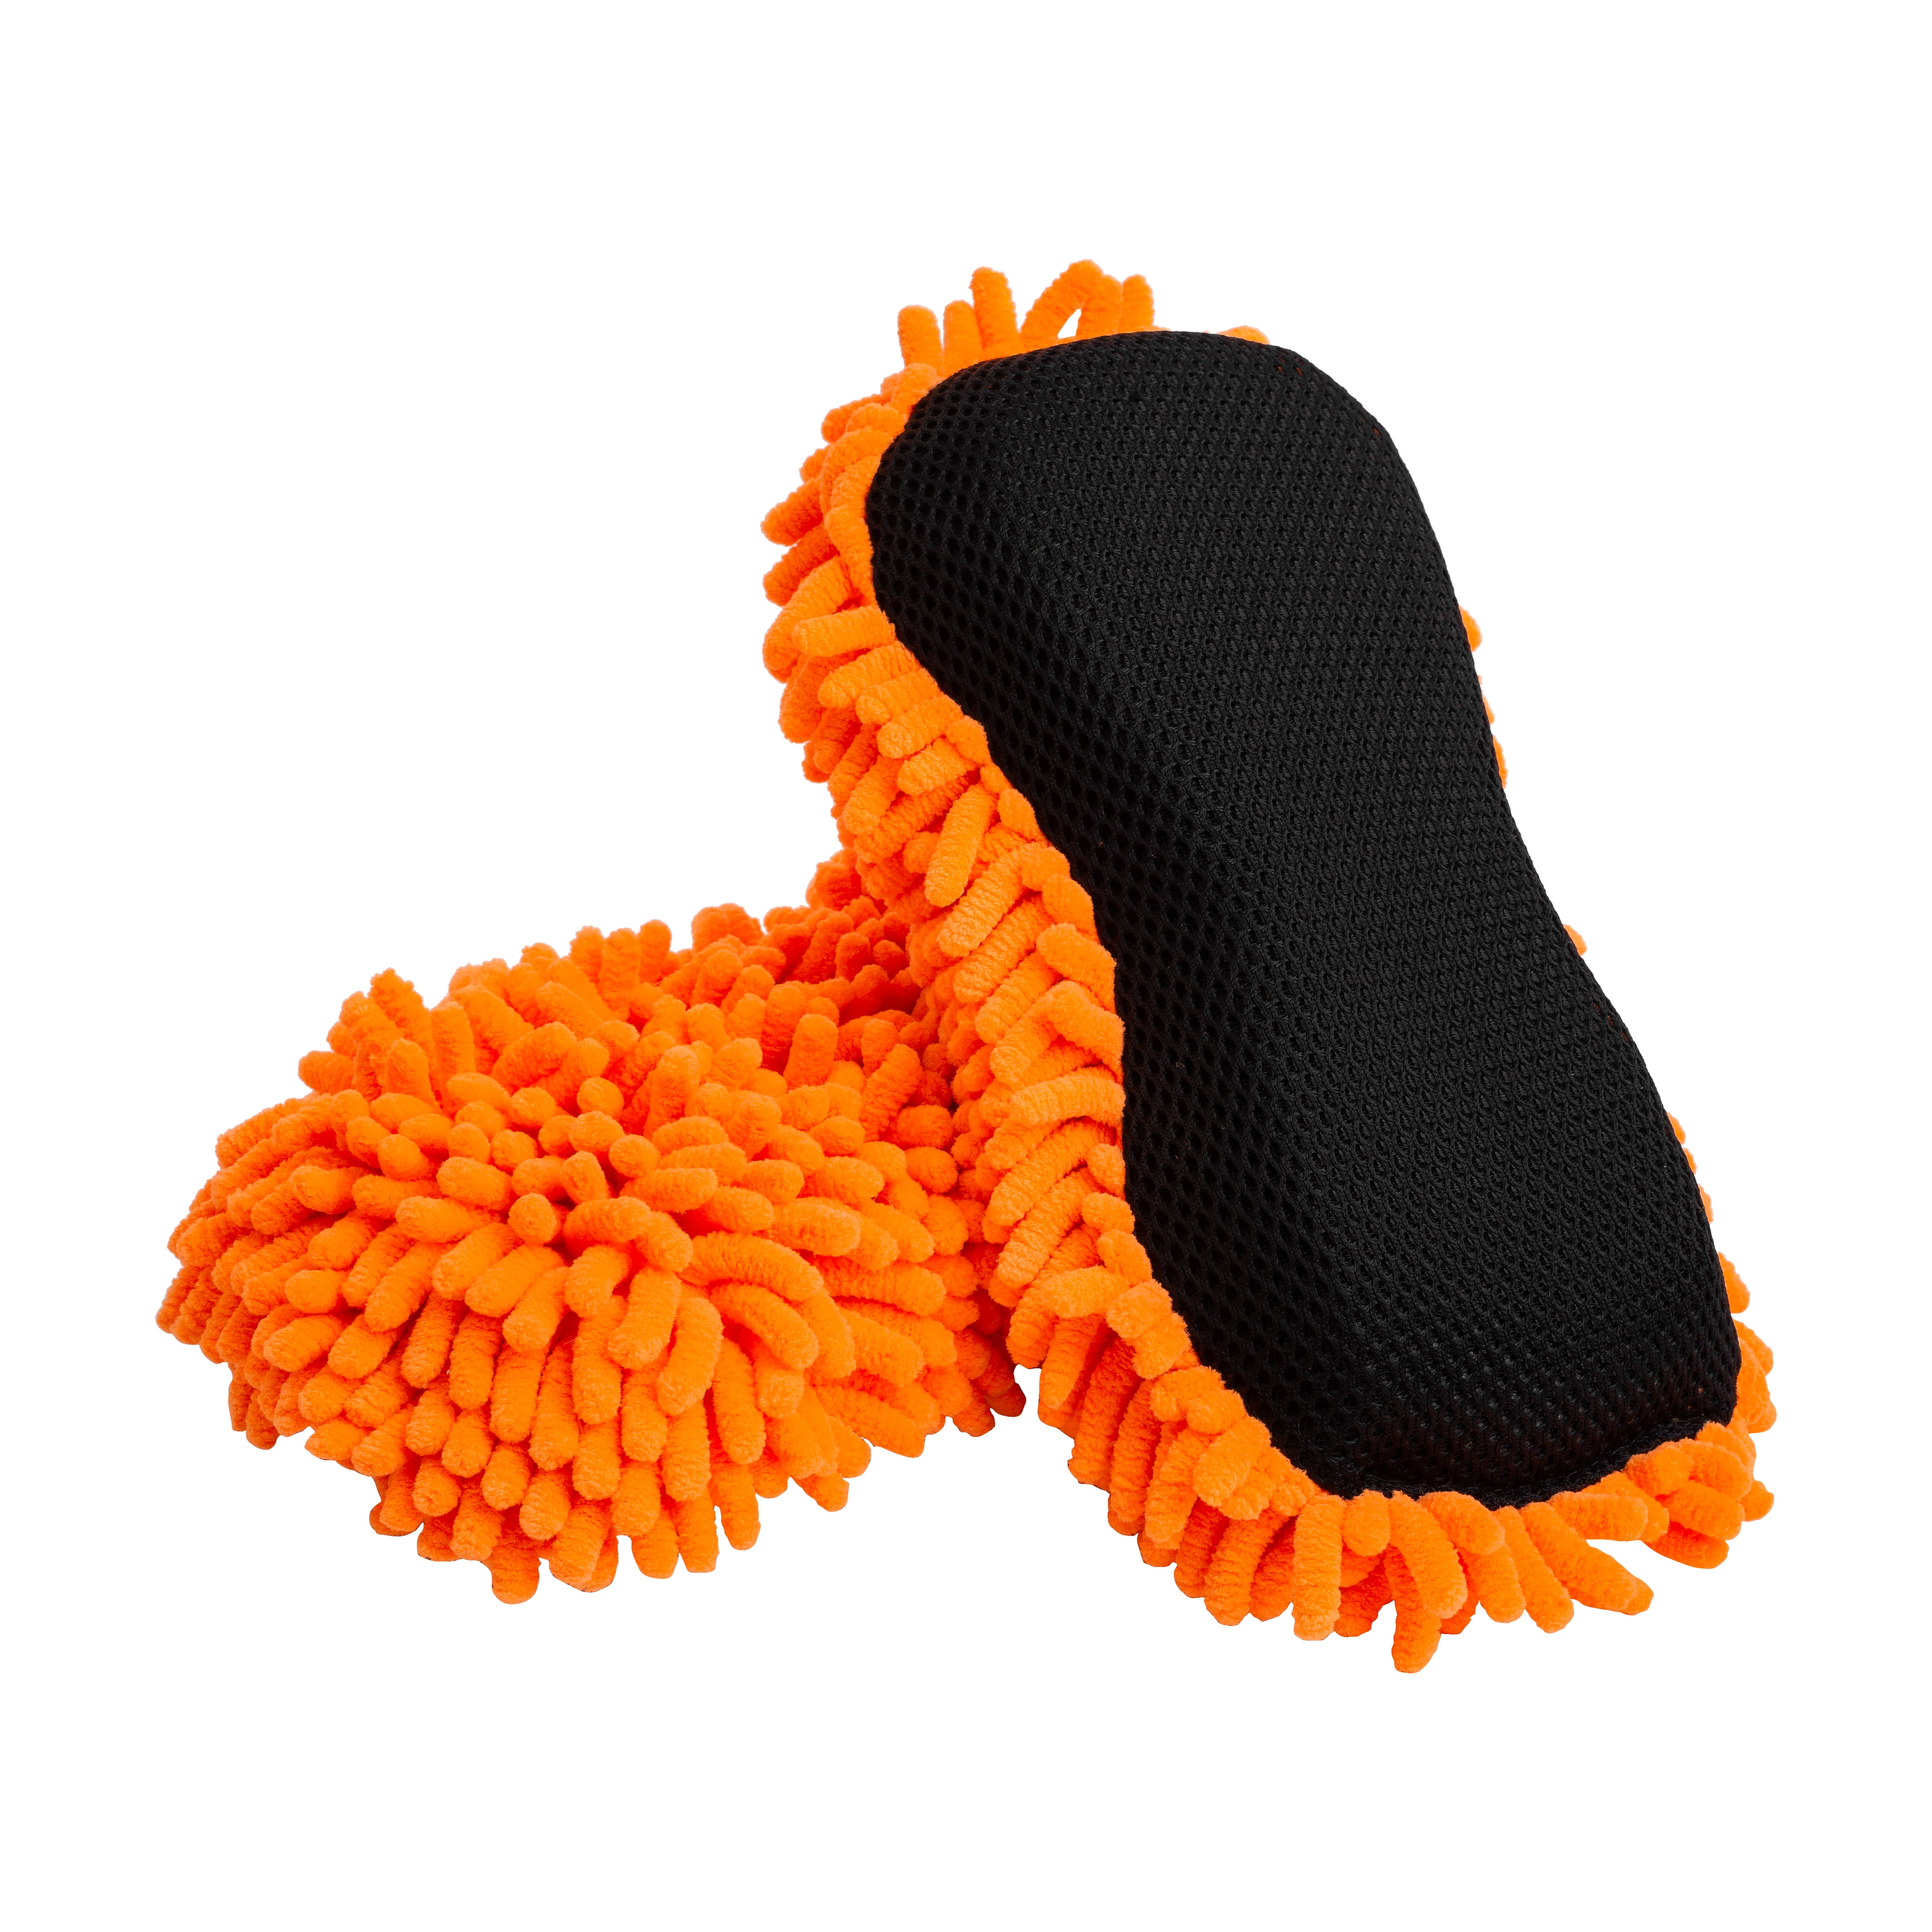 Microfiber Car Wash Sponge Non-Scratch Microfibers for Cleaner Cars, Great  for Everyday Cleaning - Automobile Cleaning Sponges Essential Part of Any